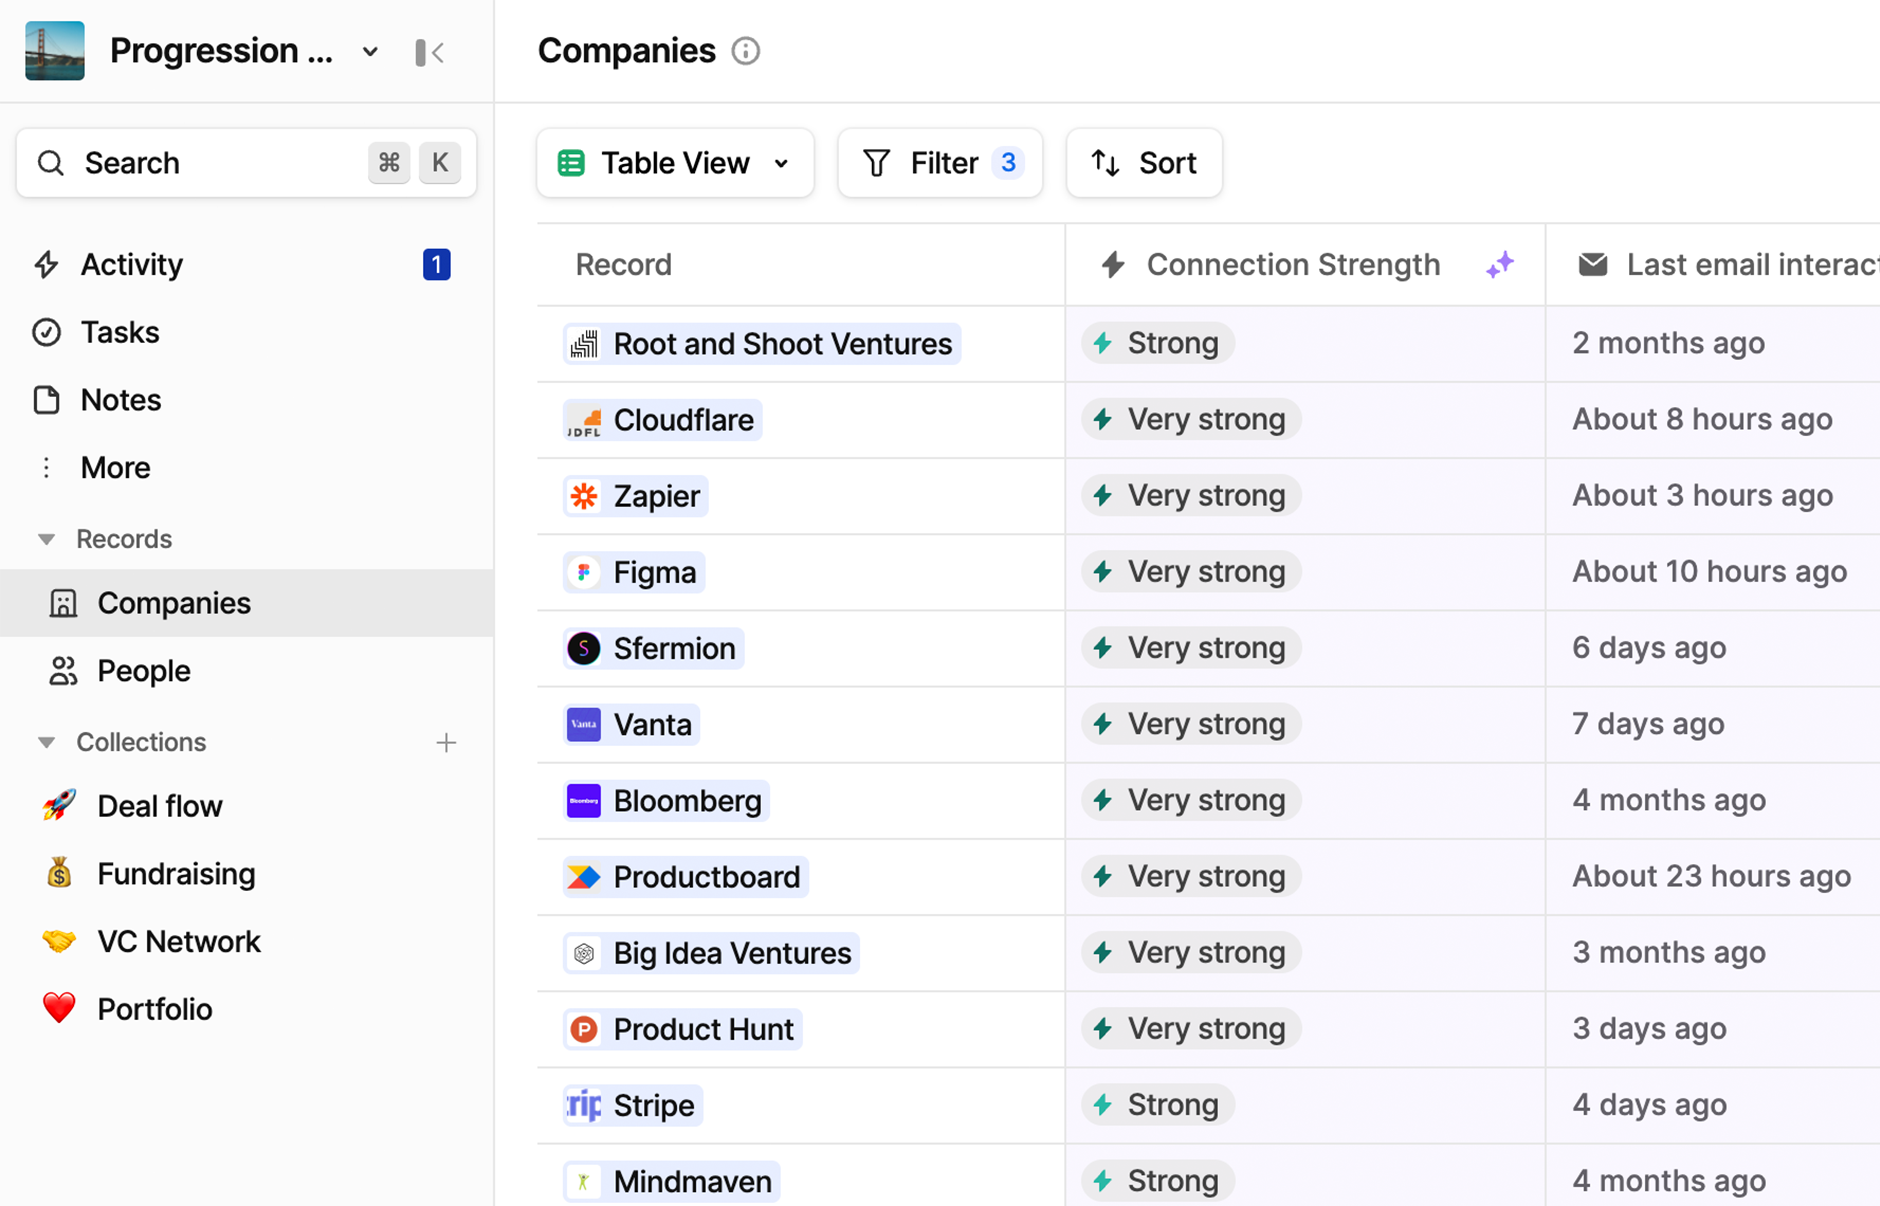  The companies tab in the Attio sidebar is selected, displaying a table view of every company in the example workspace.